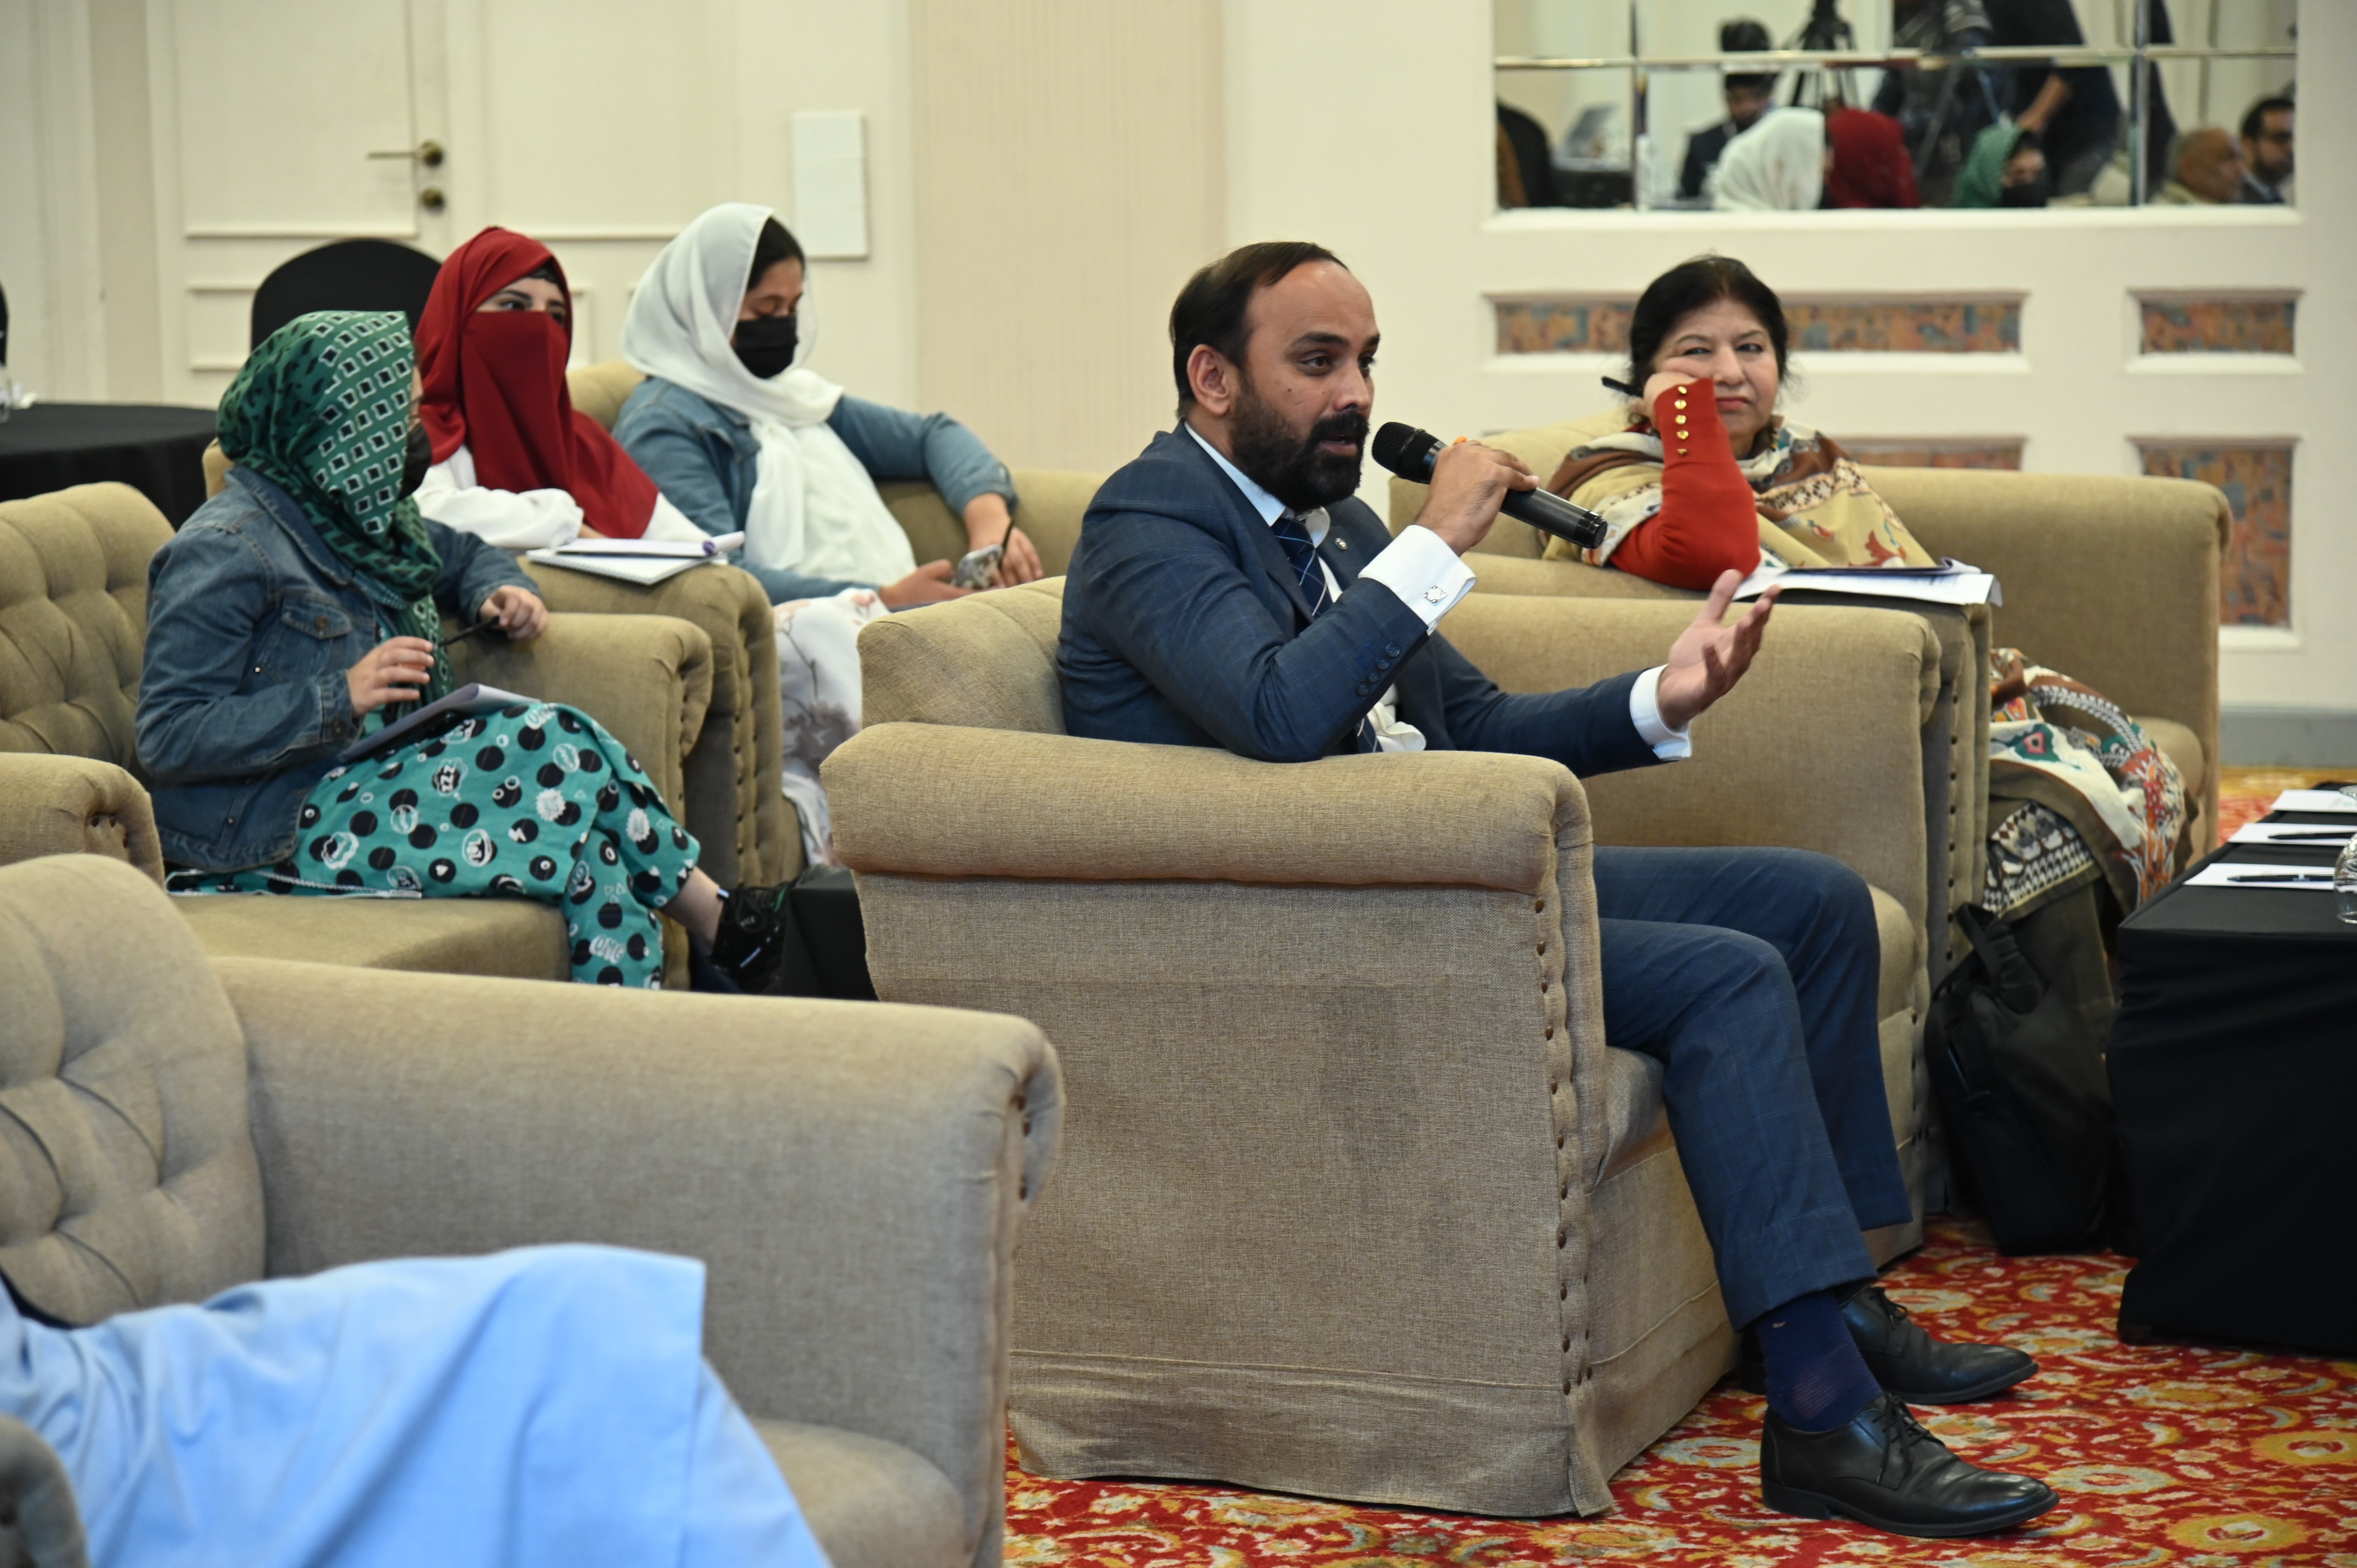 The question-and-answer session during the seminar